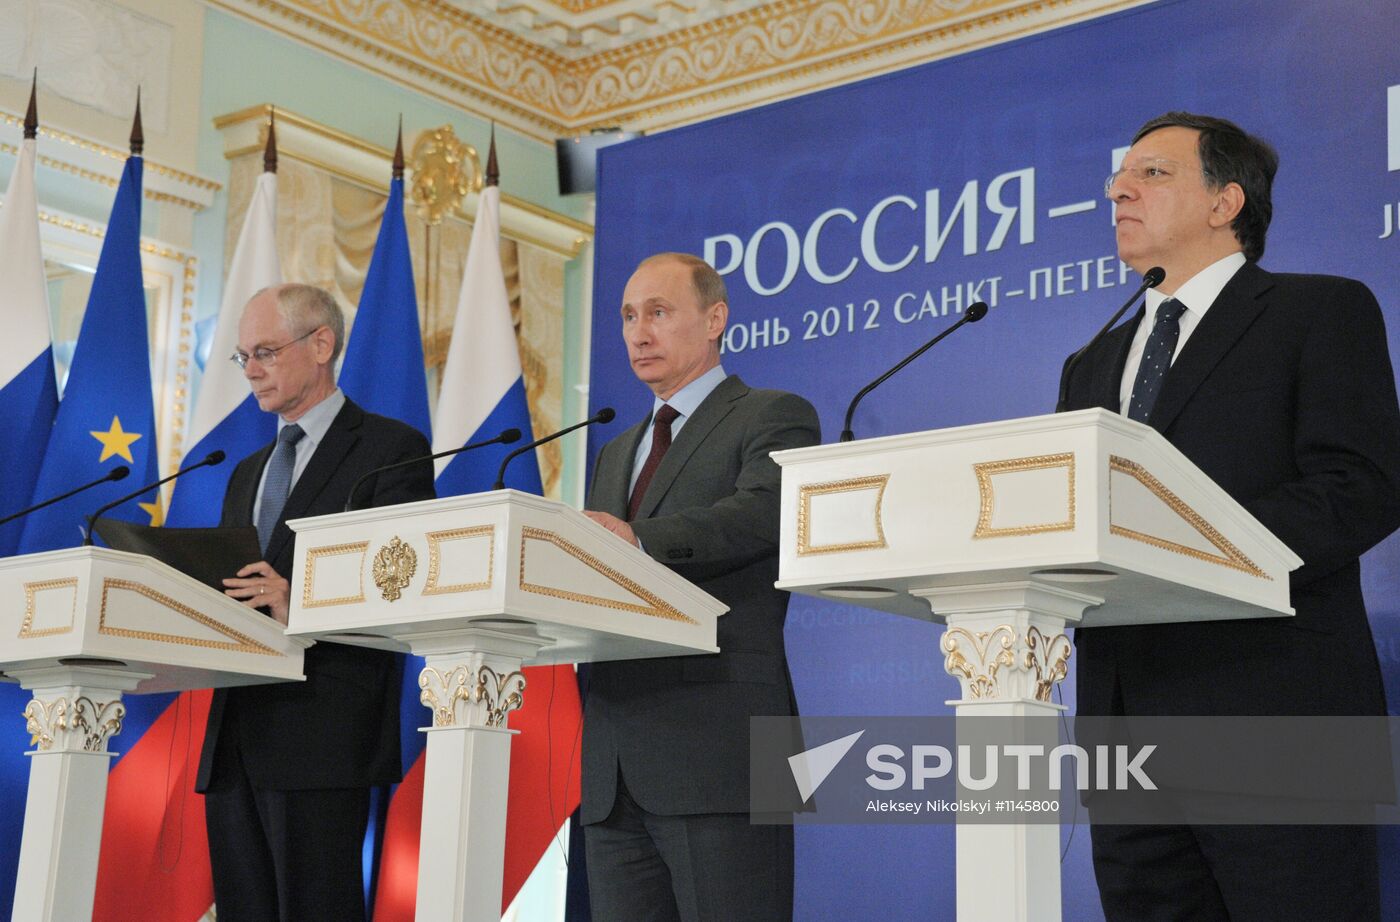 Joint news conference by participants in Russia-EU summit